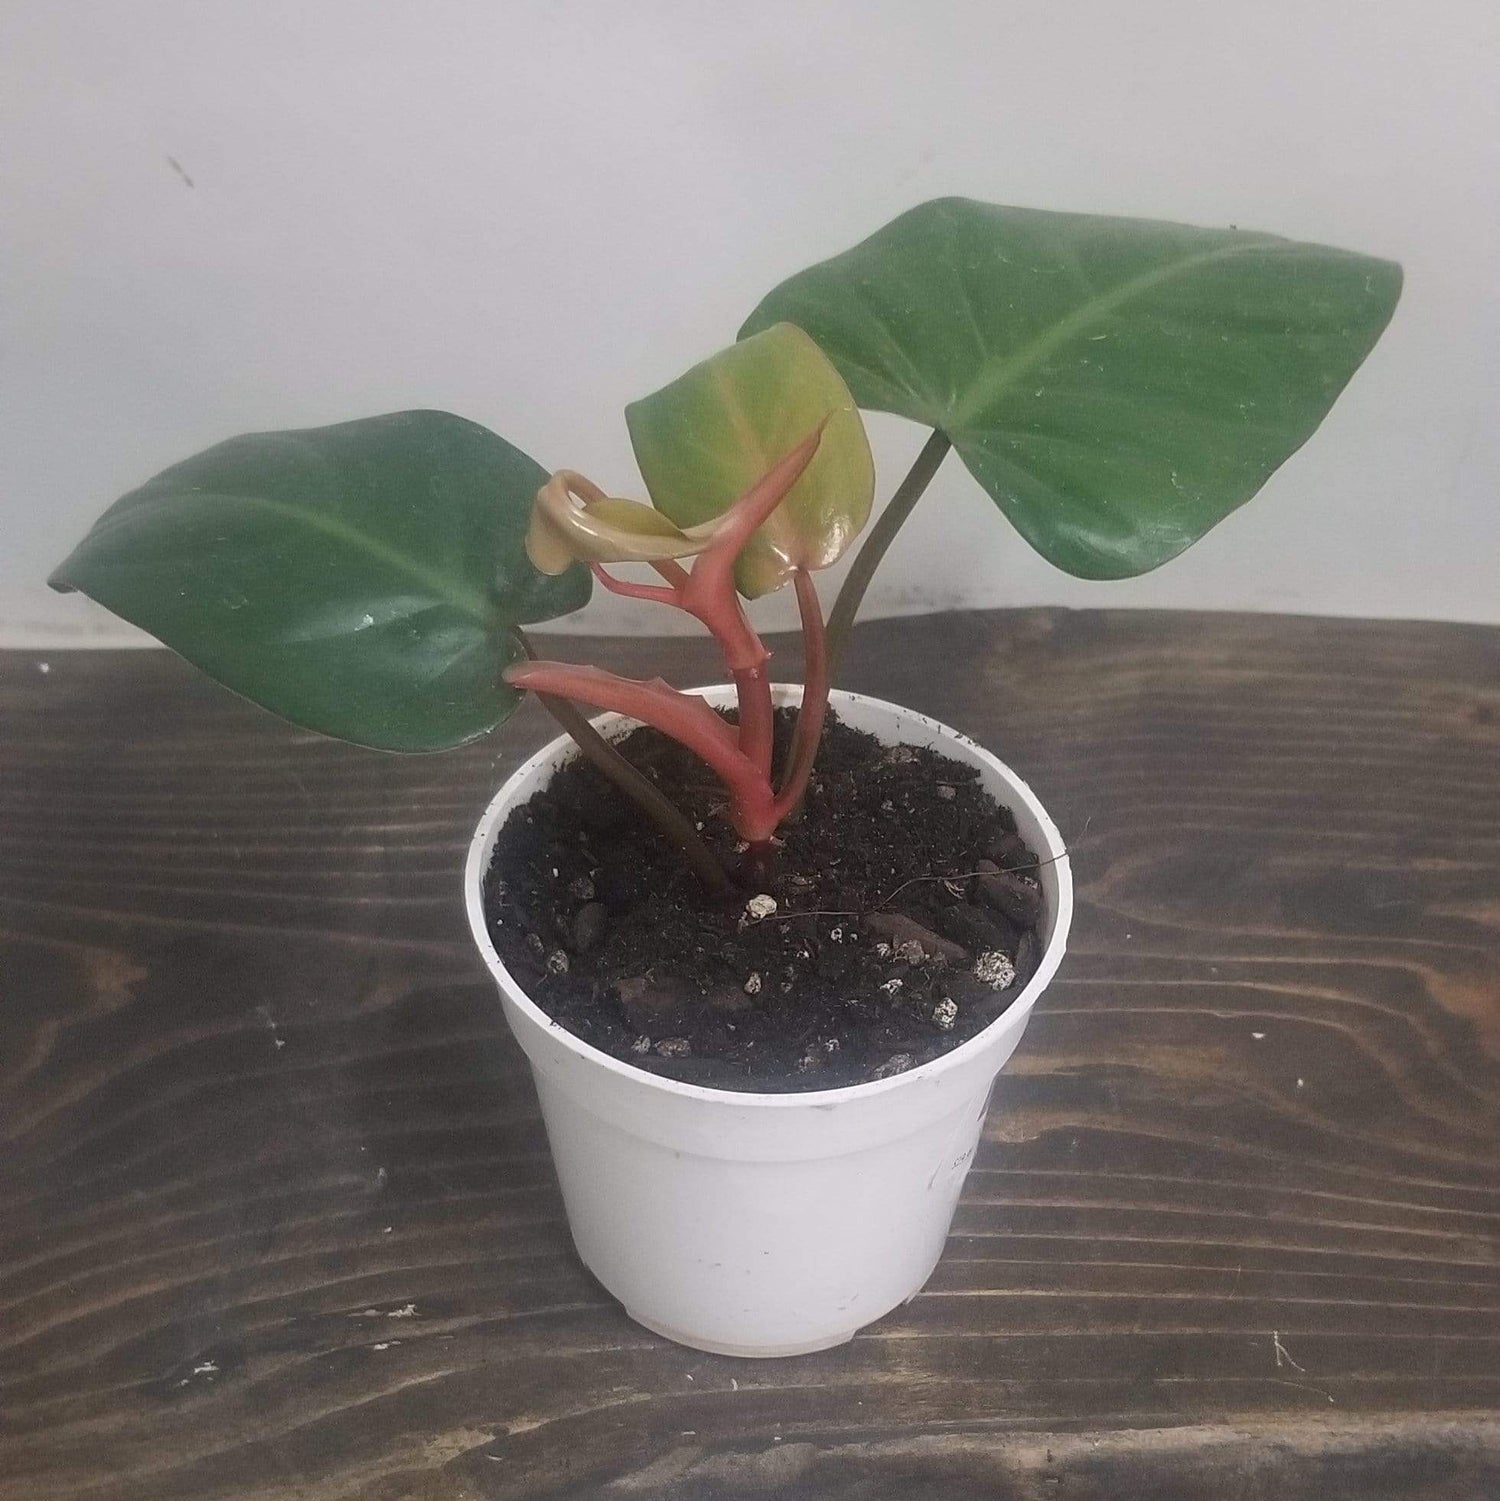 Urban Sprouts Plant 4" in nursery pot Philodendron 'Red Emerald'